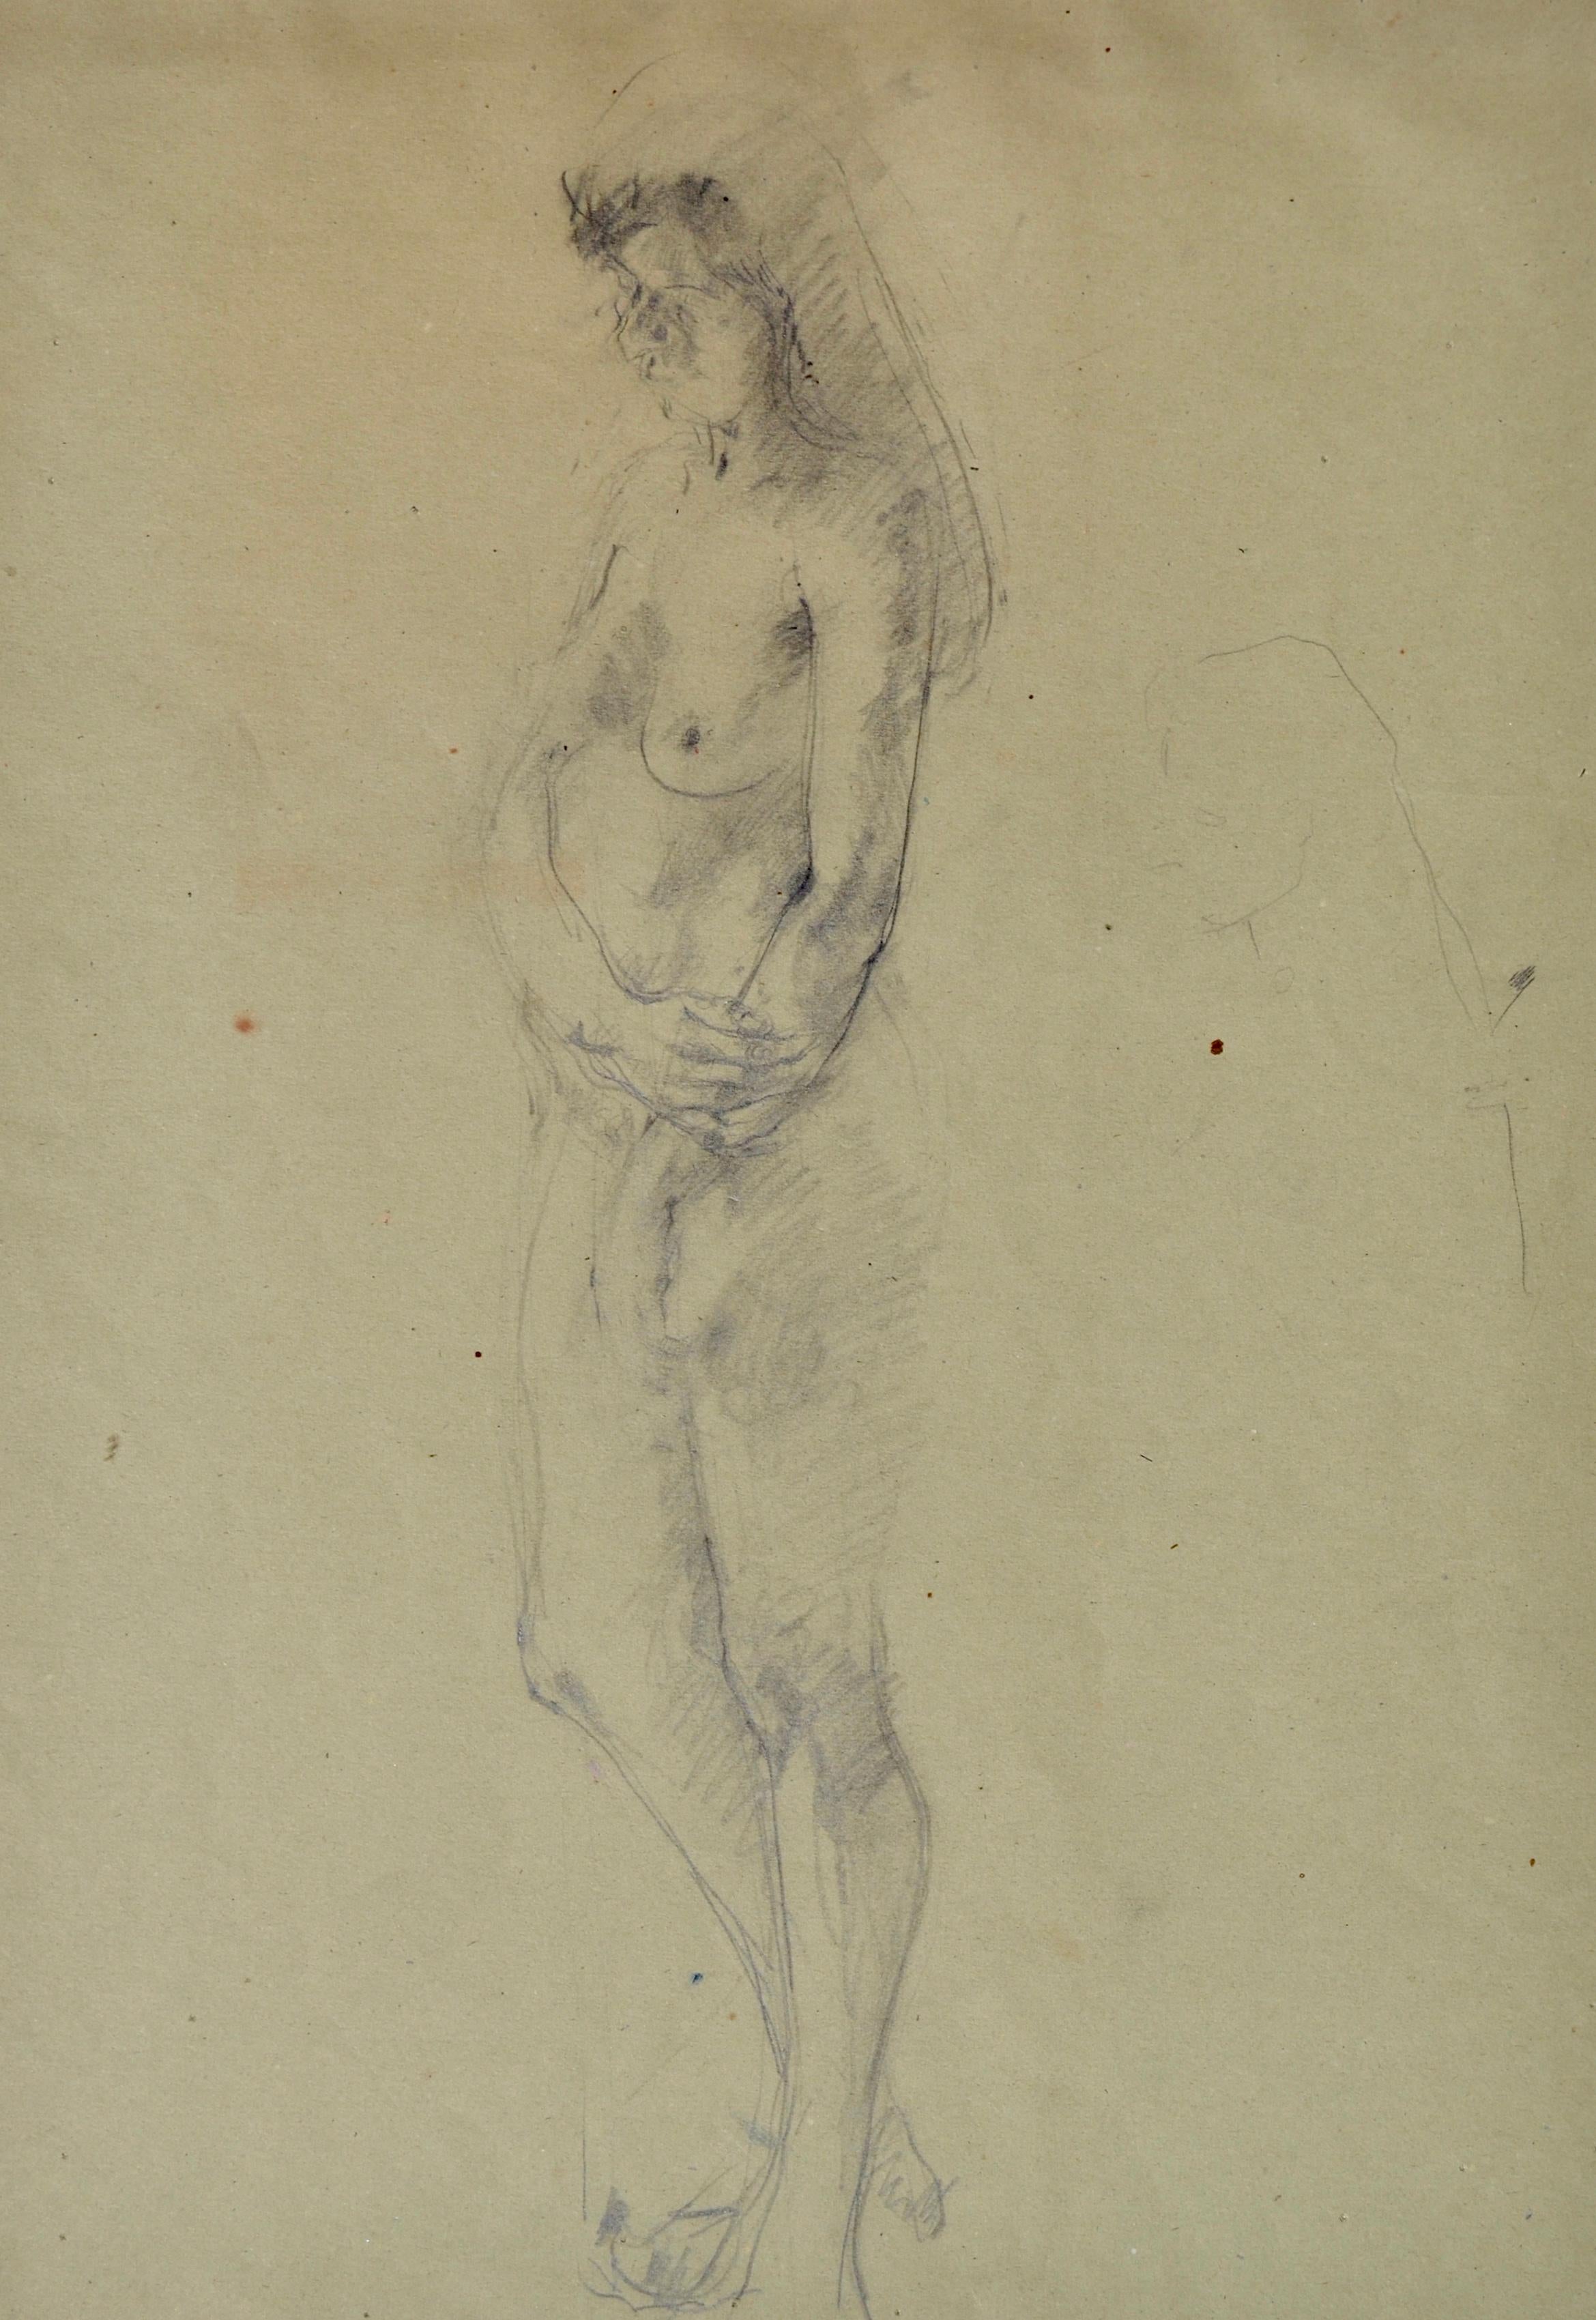 CAROLYN SERGEANT
(1937-2018)

Standing Nude

Signed A M C Cann (the artist's maiden name) on the reverse and inscribed Finals
Pencil on buff paper, unframed

49.5 by 34 cm., 19 ½  by 13 ½ in. 
(mount size 66 by 49.5 cm., 26 by 19 ½ in.)

Carolyn